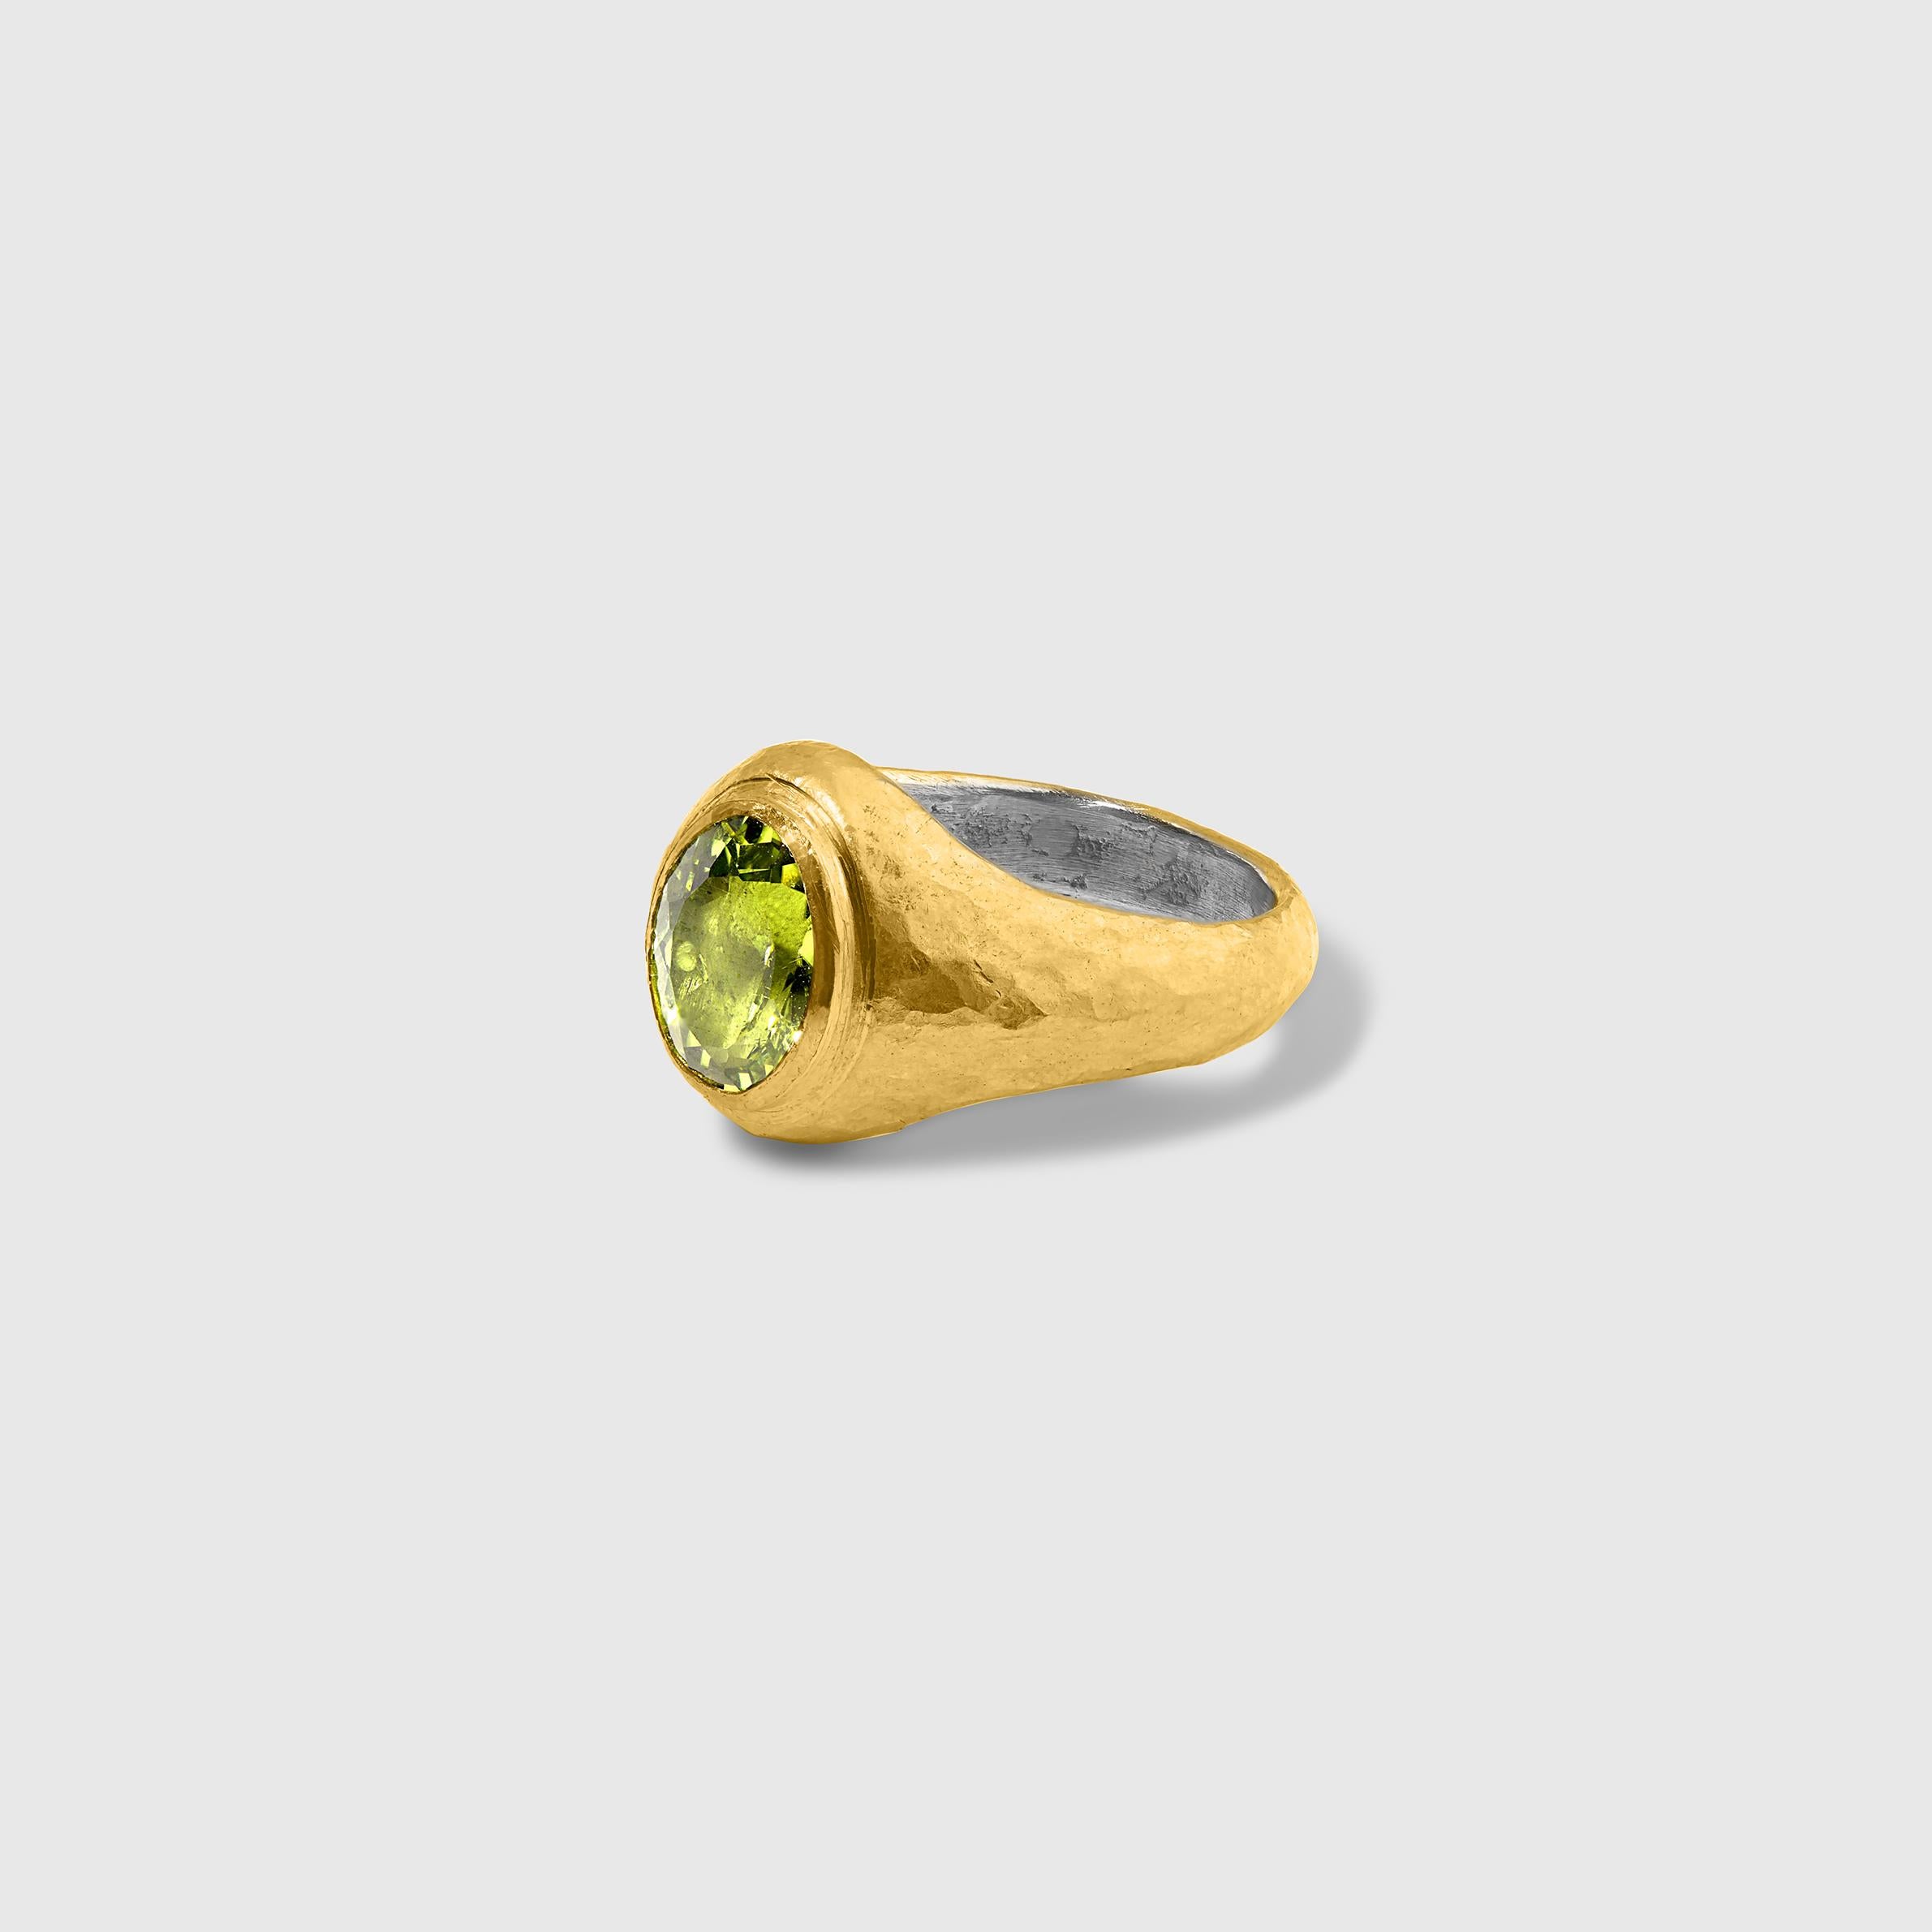 Contemporary 2.70 ct Oval Bright Green Peridot Signet Ring with 24kt Gold and Silver For Sale